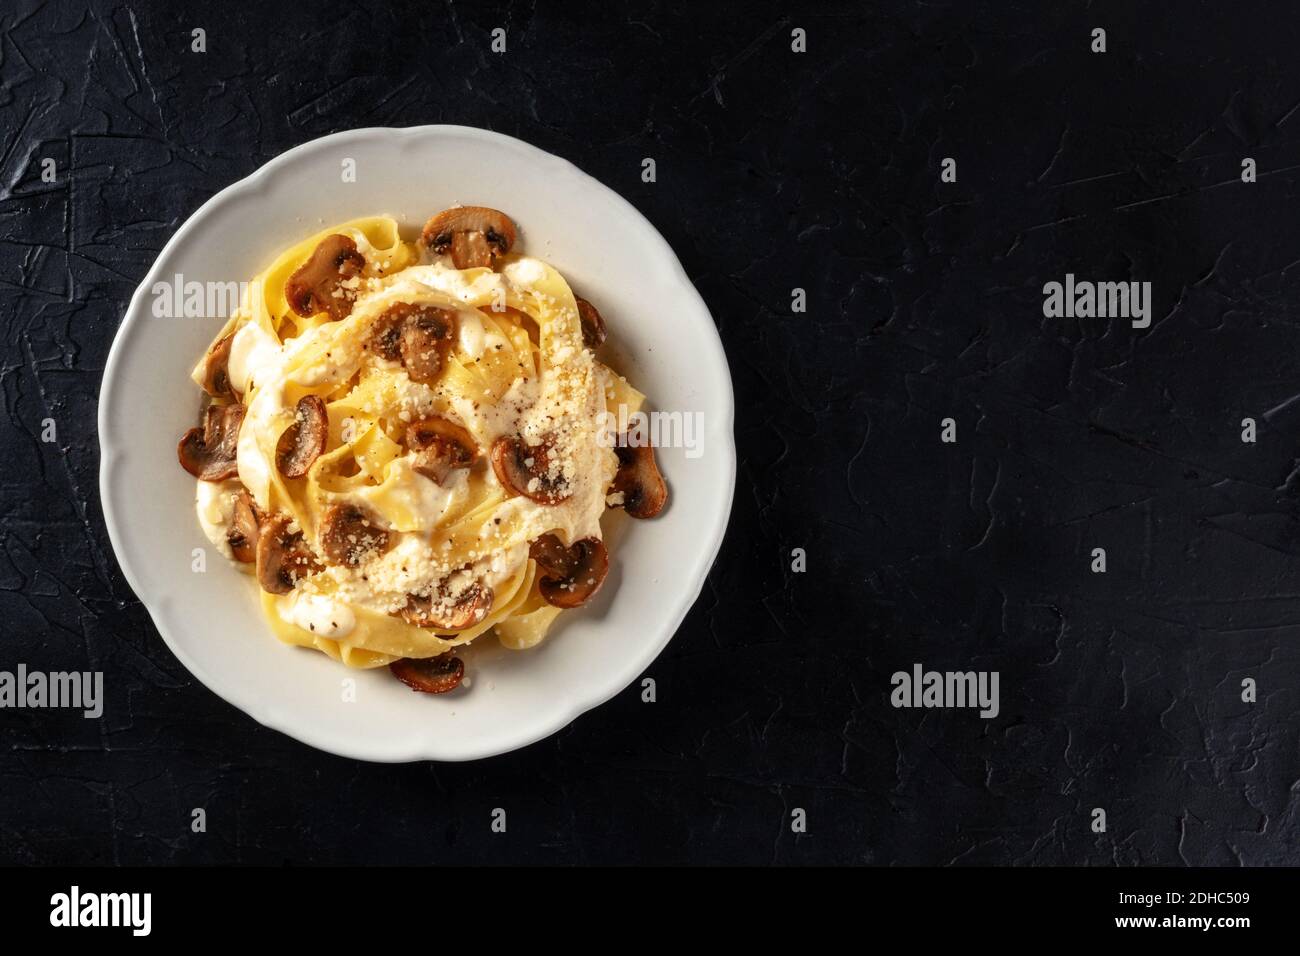 Pasta with mushrooms sauce and grated cheese, shot from athe top on a black background Stock Photo